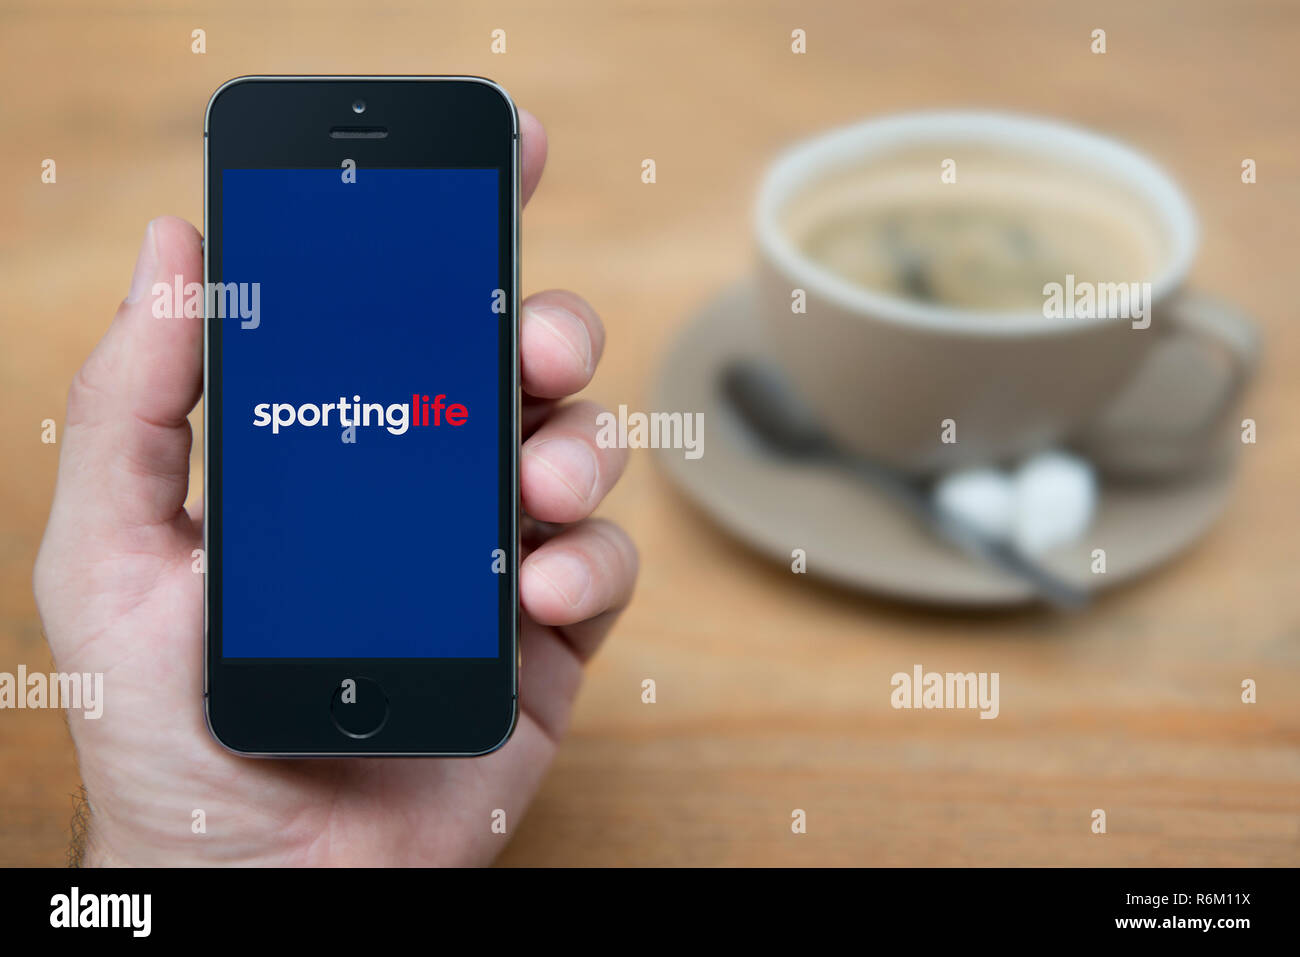 A man looks at his iPhone which displays the Sporting Life logo (Editorial use only). Stock Photo